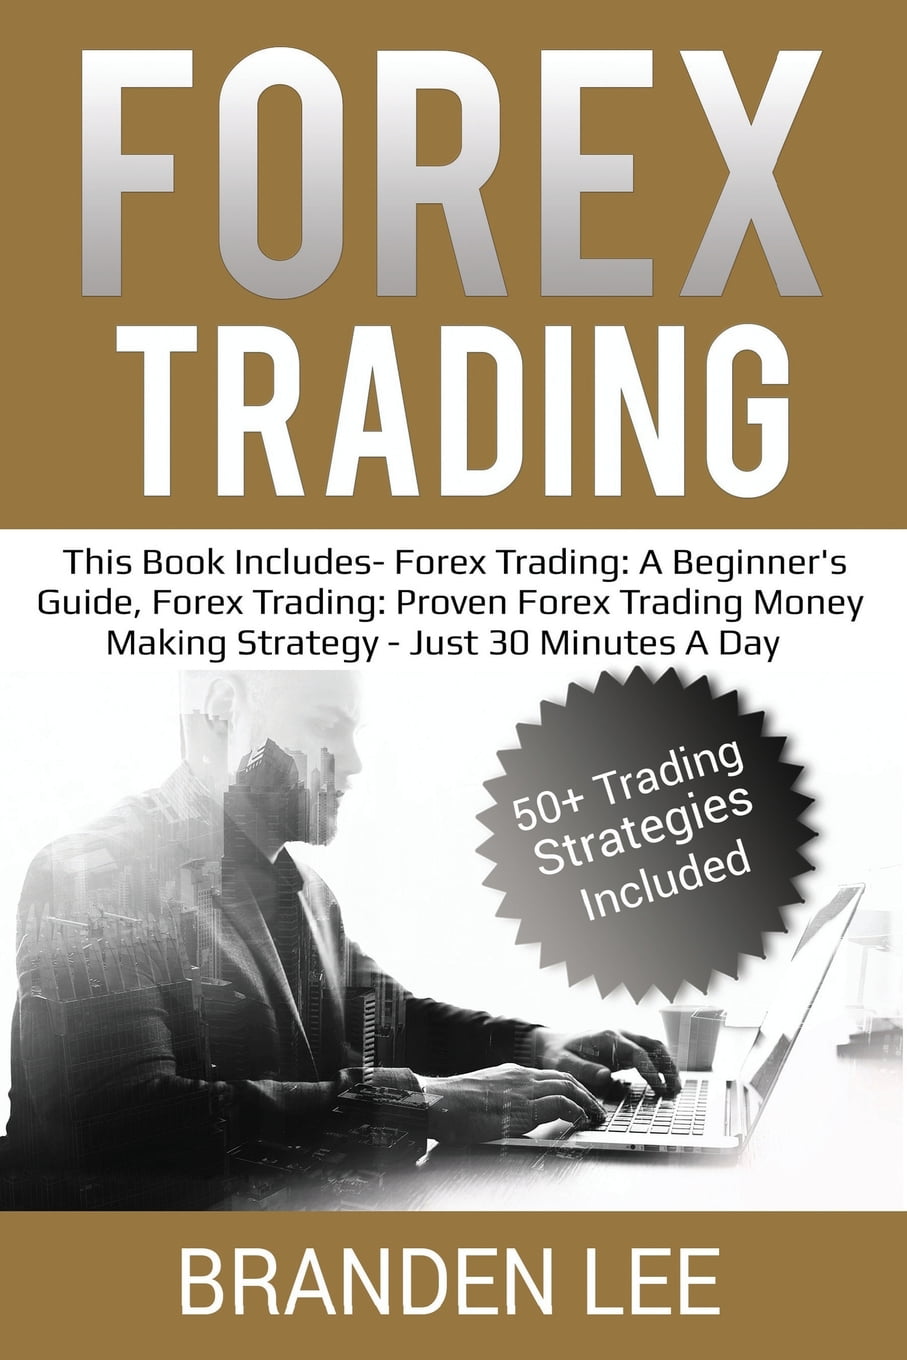 Forex Trading : This Book Includes- Forex Trading: A Beginner's Guide, Forex  Trading: Proven Forex Trading Money Making Strategy - Just 30 Minutes a Day  (Paperback) - Walmart.com